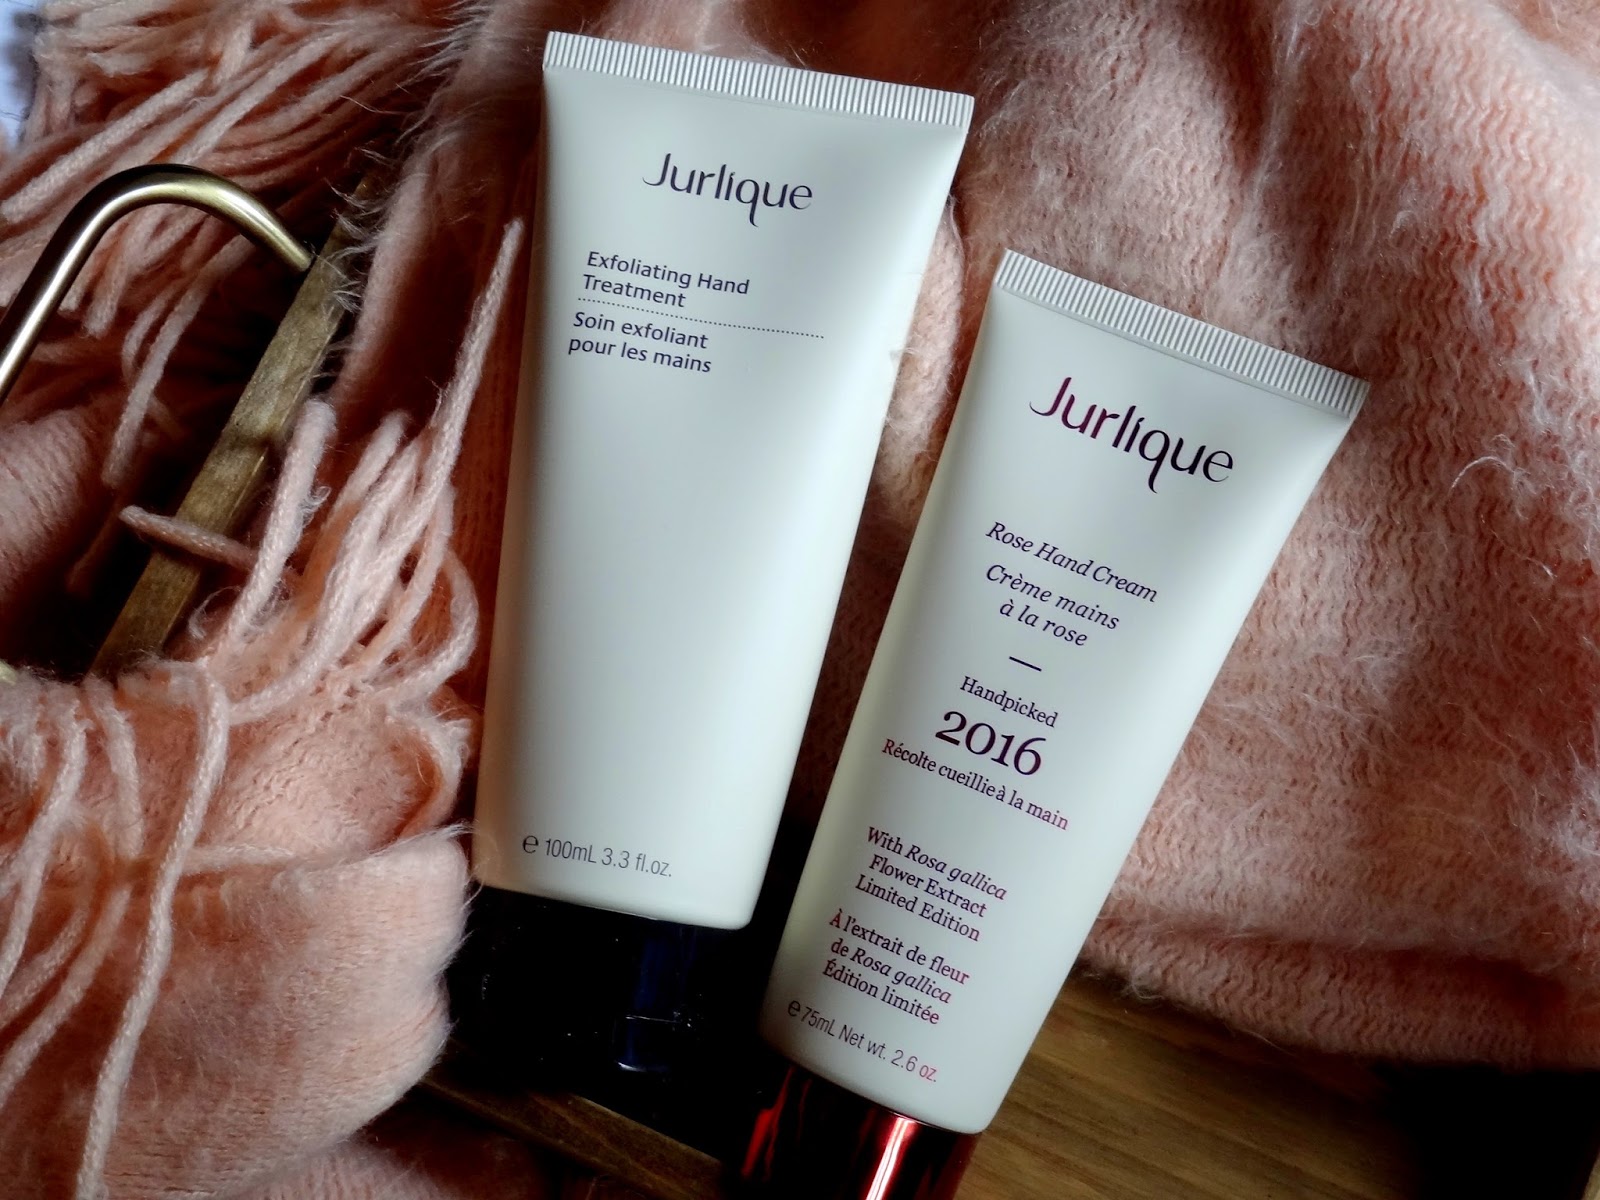 Makeup, and More: Jurlique Exfoliating Hand Treatment and Rose Hand Cream Handpicked